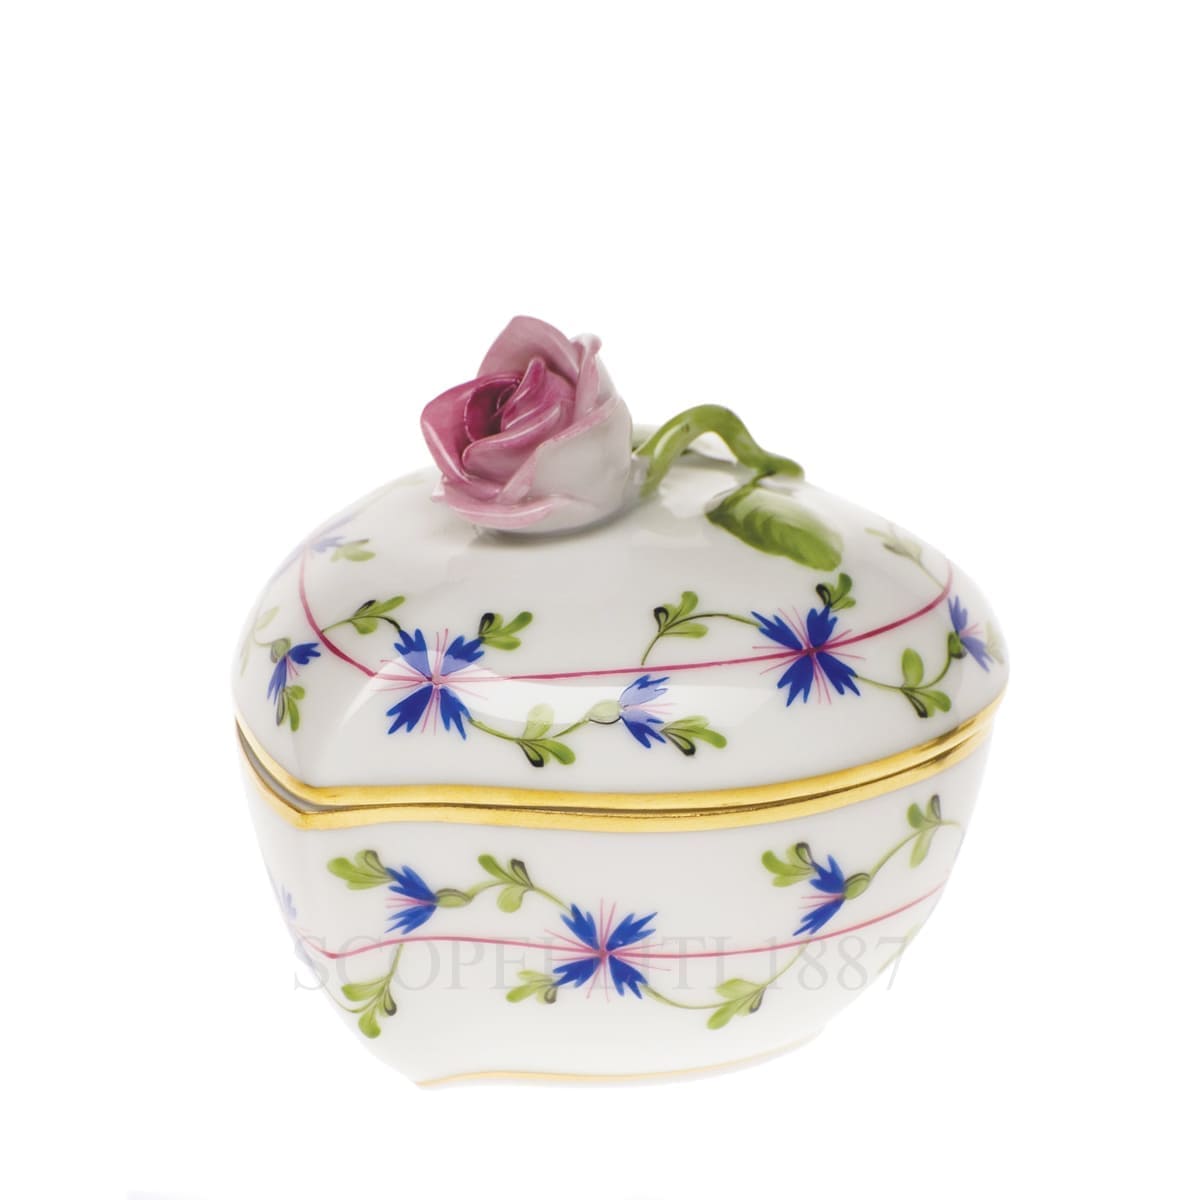 herend handpainted porcelain heart box with rose